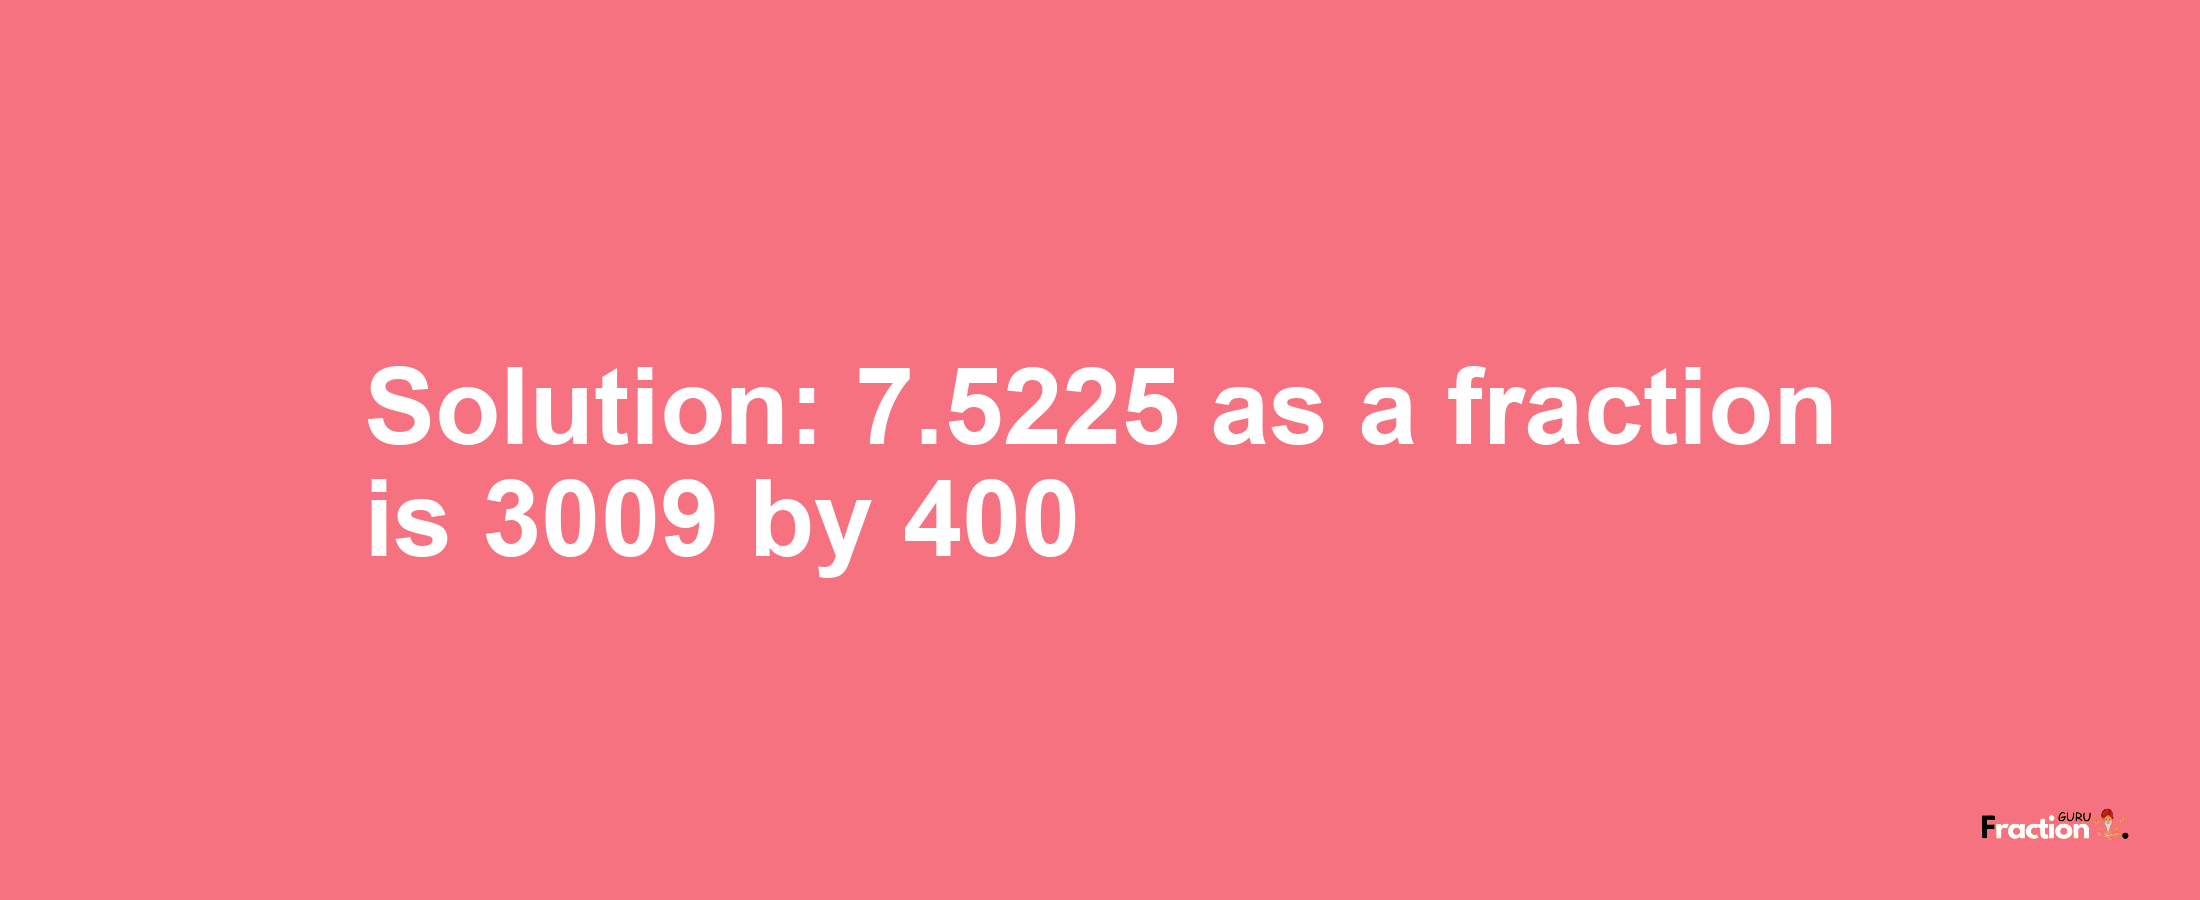 Solution:7.5225 as a fraction is 3009/400